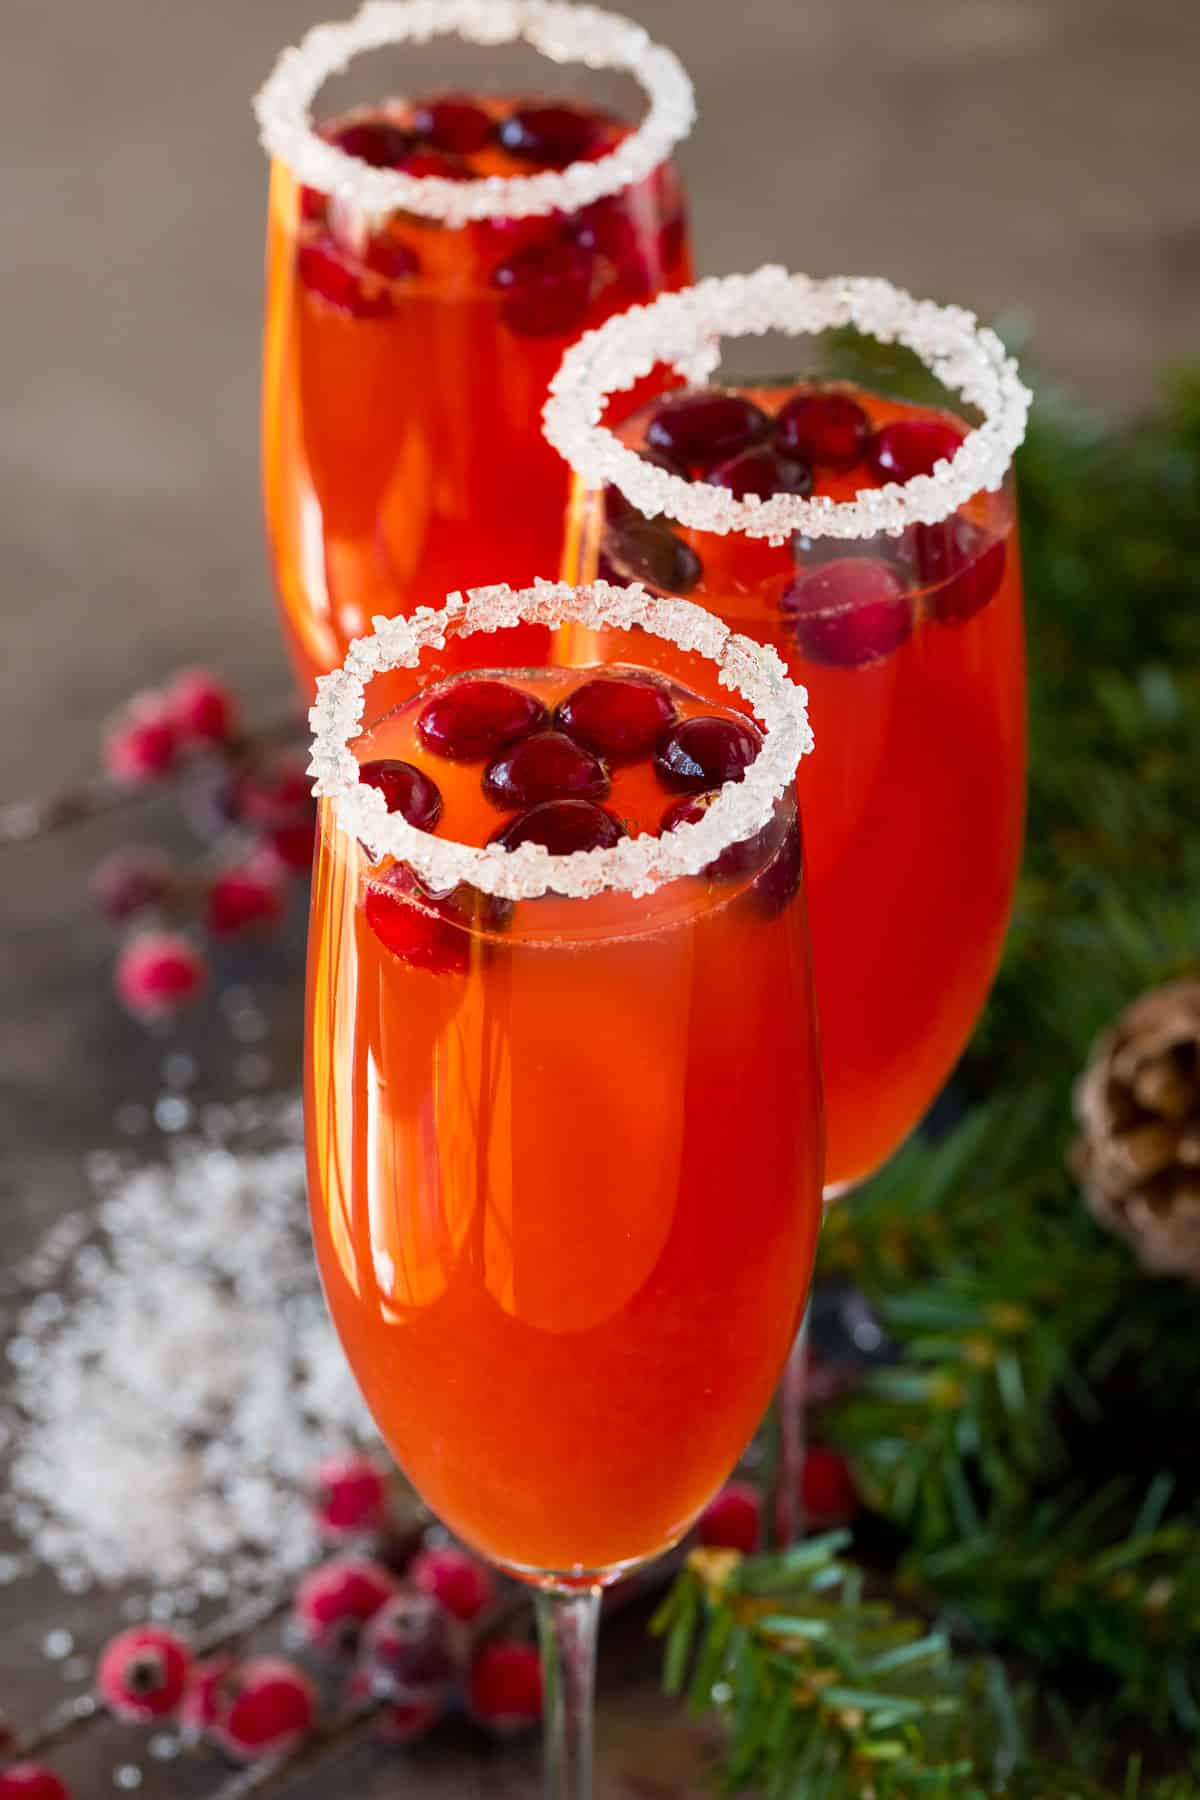 Glasses of cranberry mimosa with a sugar rim and a fresh cranberry garnish.